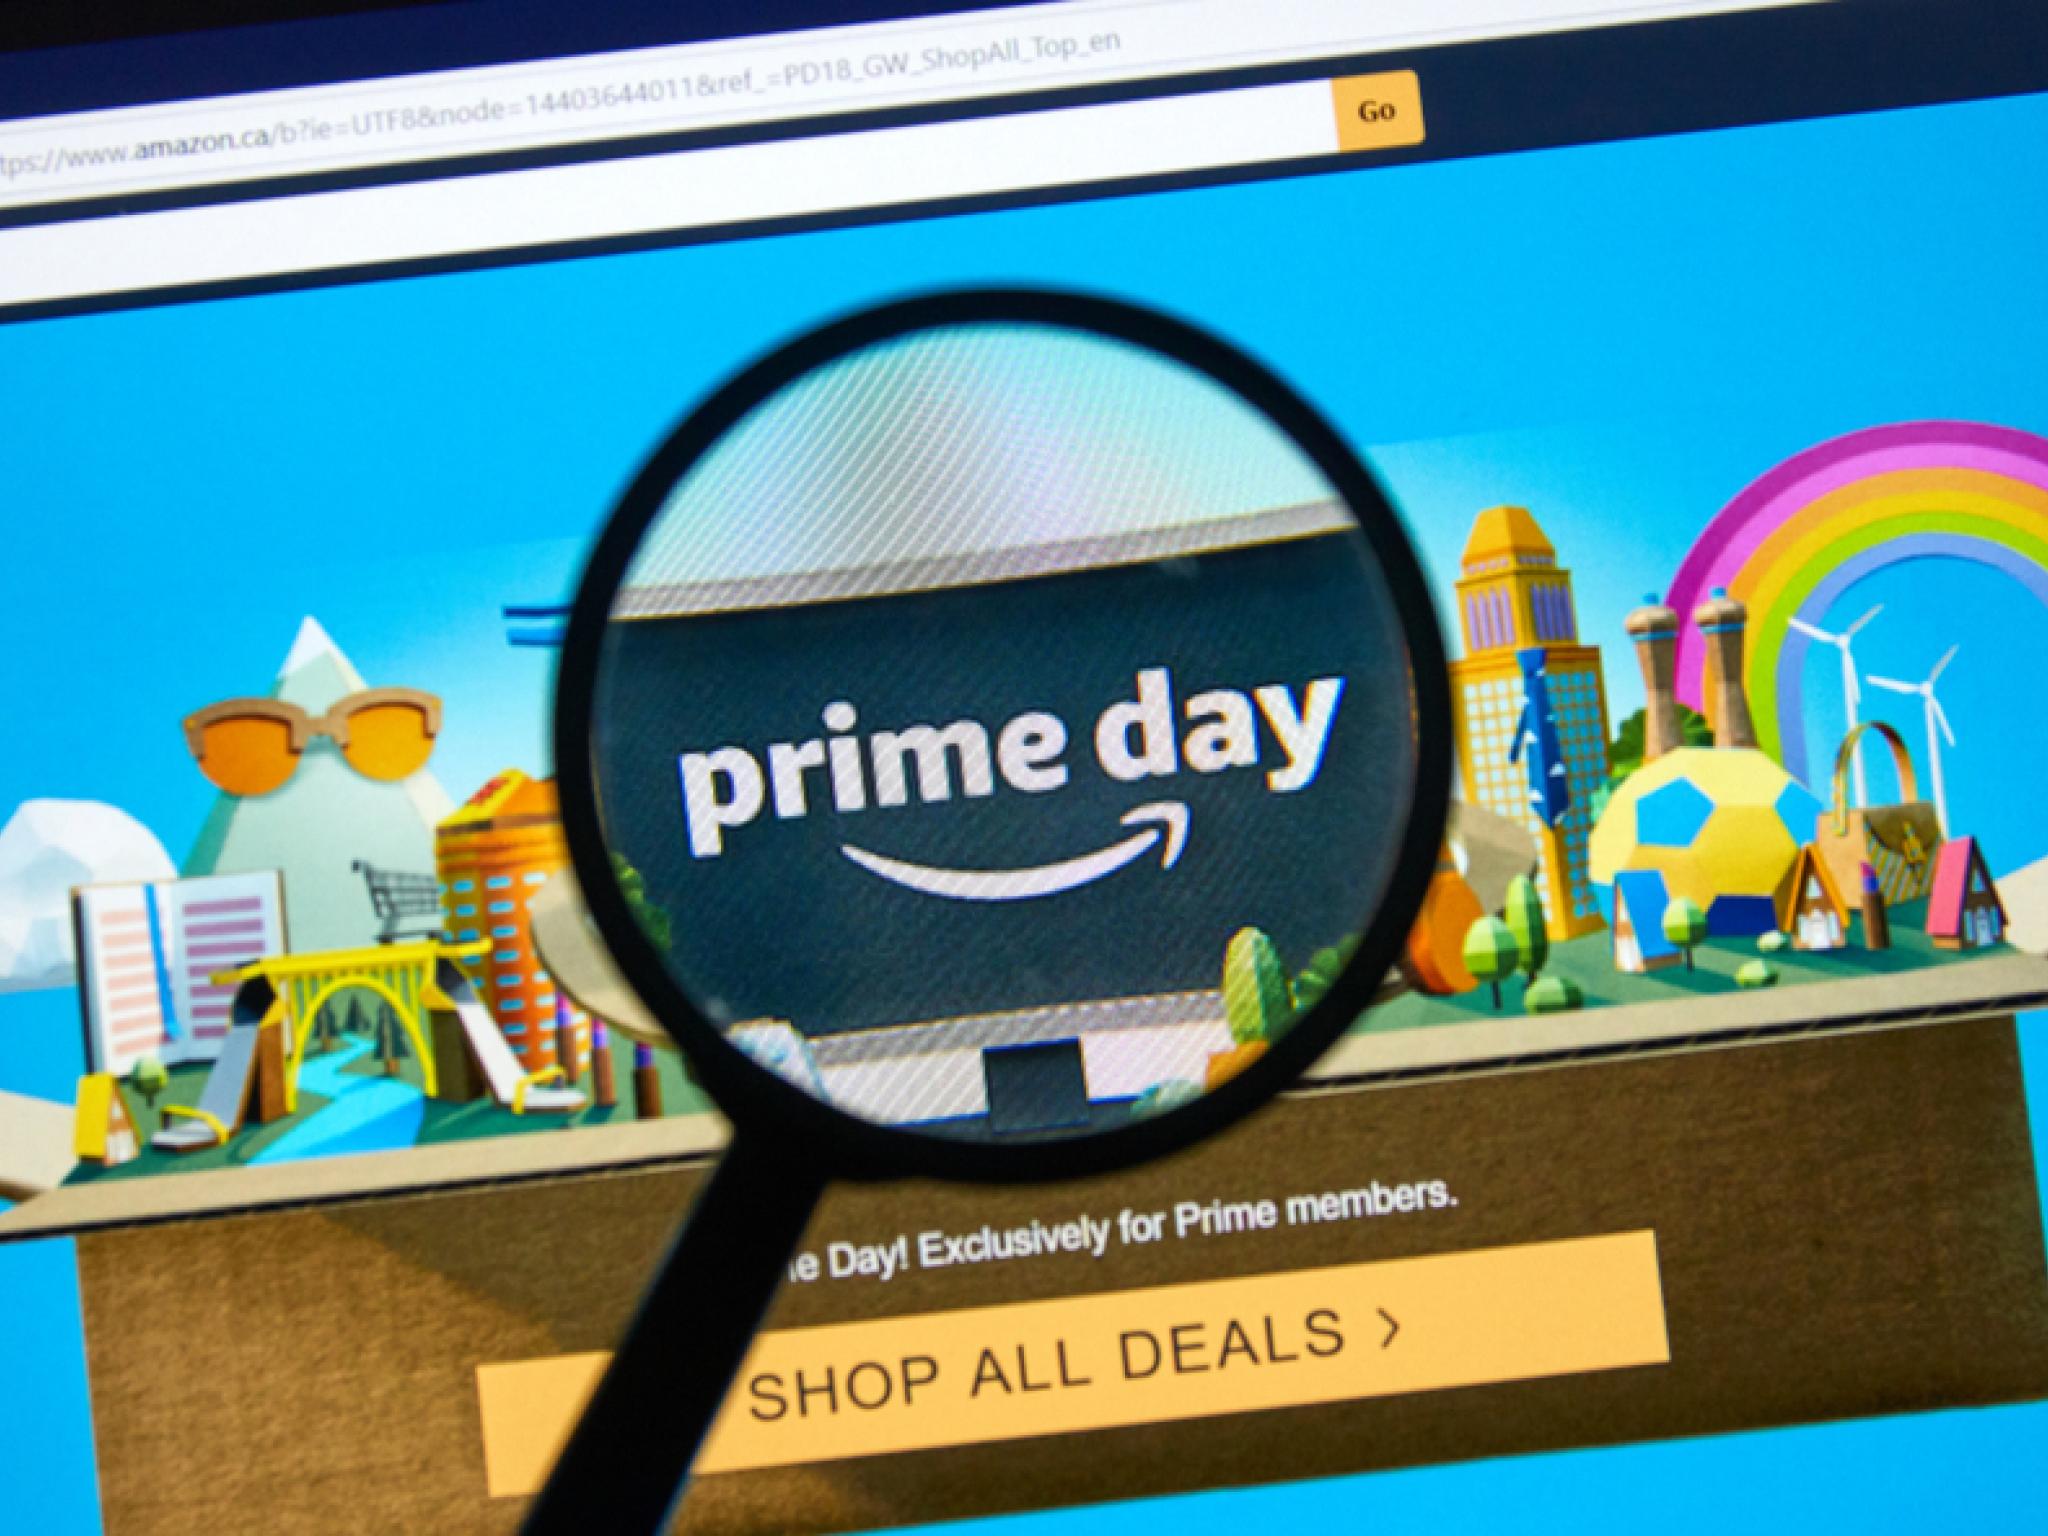  amazon-gears-up-for-prime-day-2024-with-2t-market-cap 